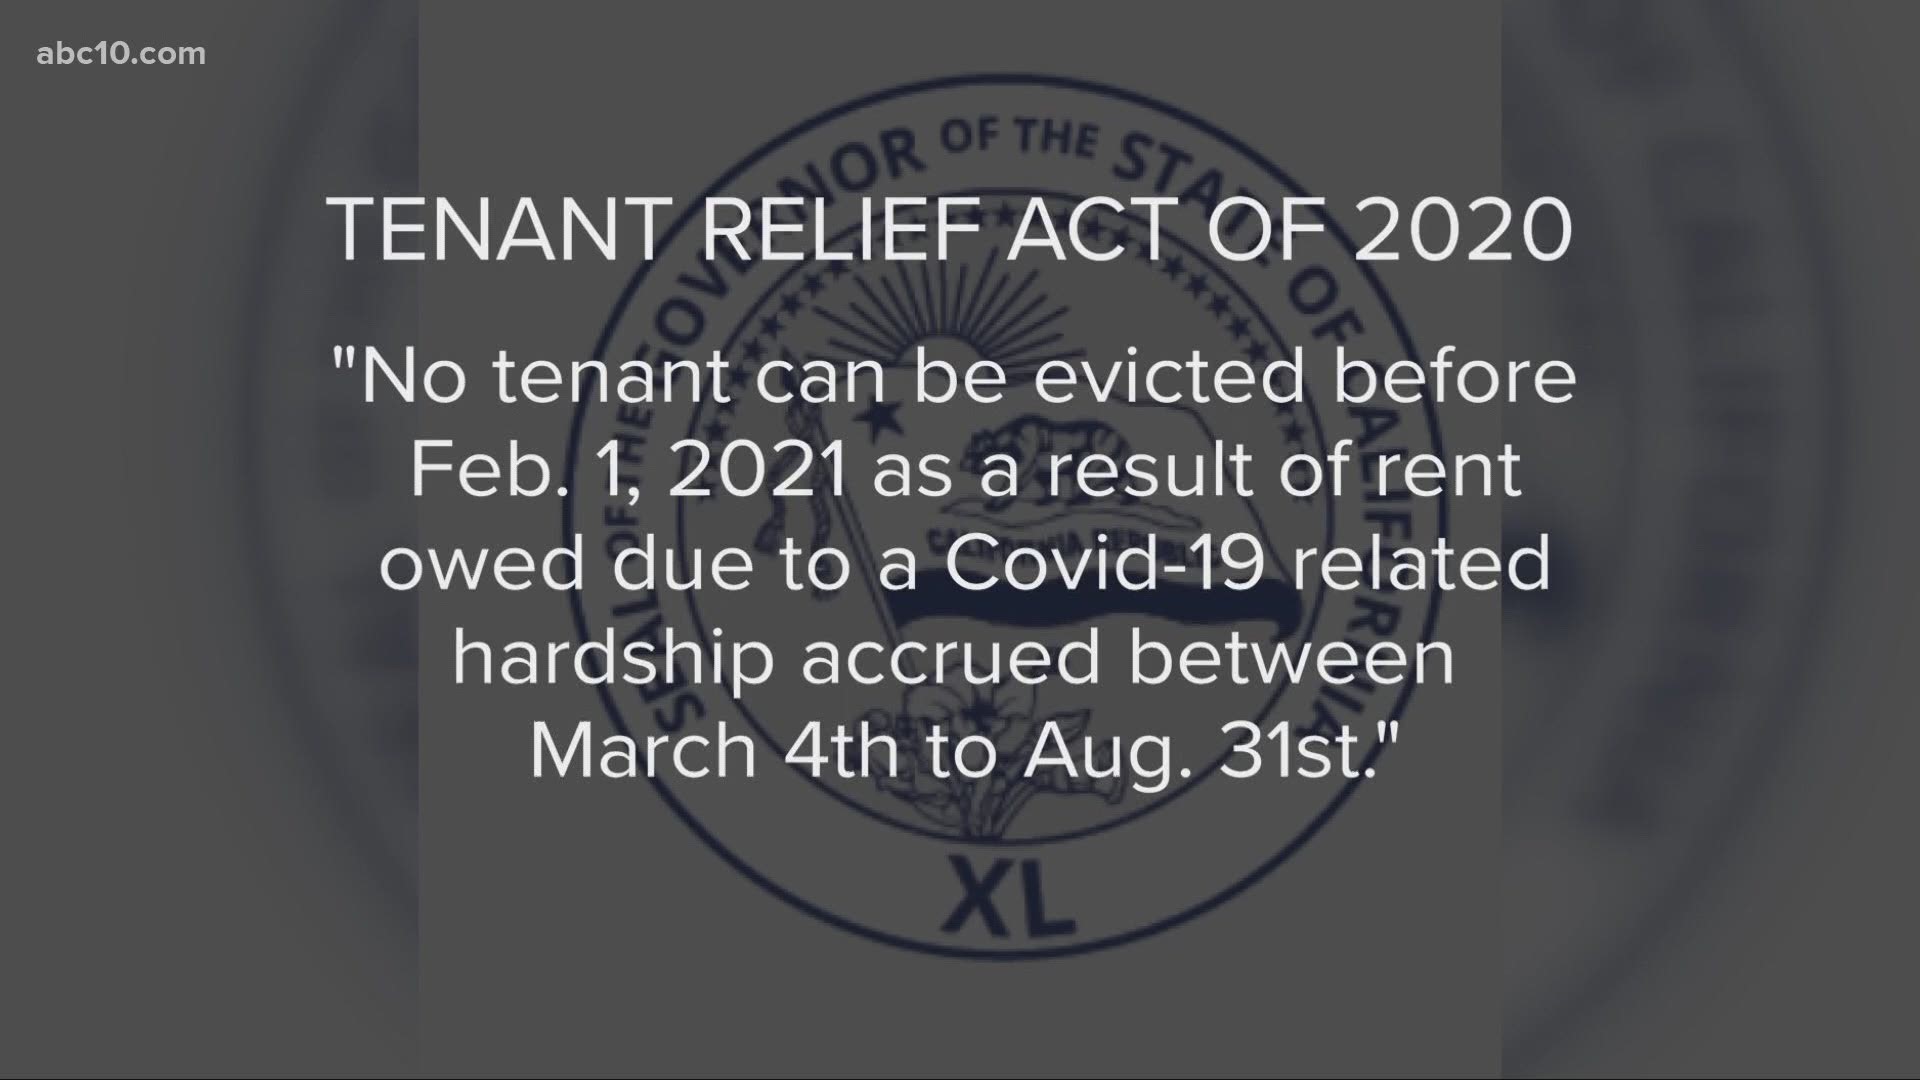 Governor Gavin Newsom signed the 'Tenant Relief Act' which gives protections to renters facing hardships because of the coronavirus.